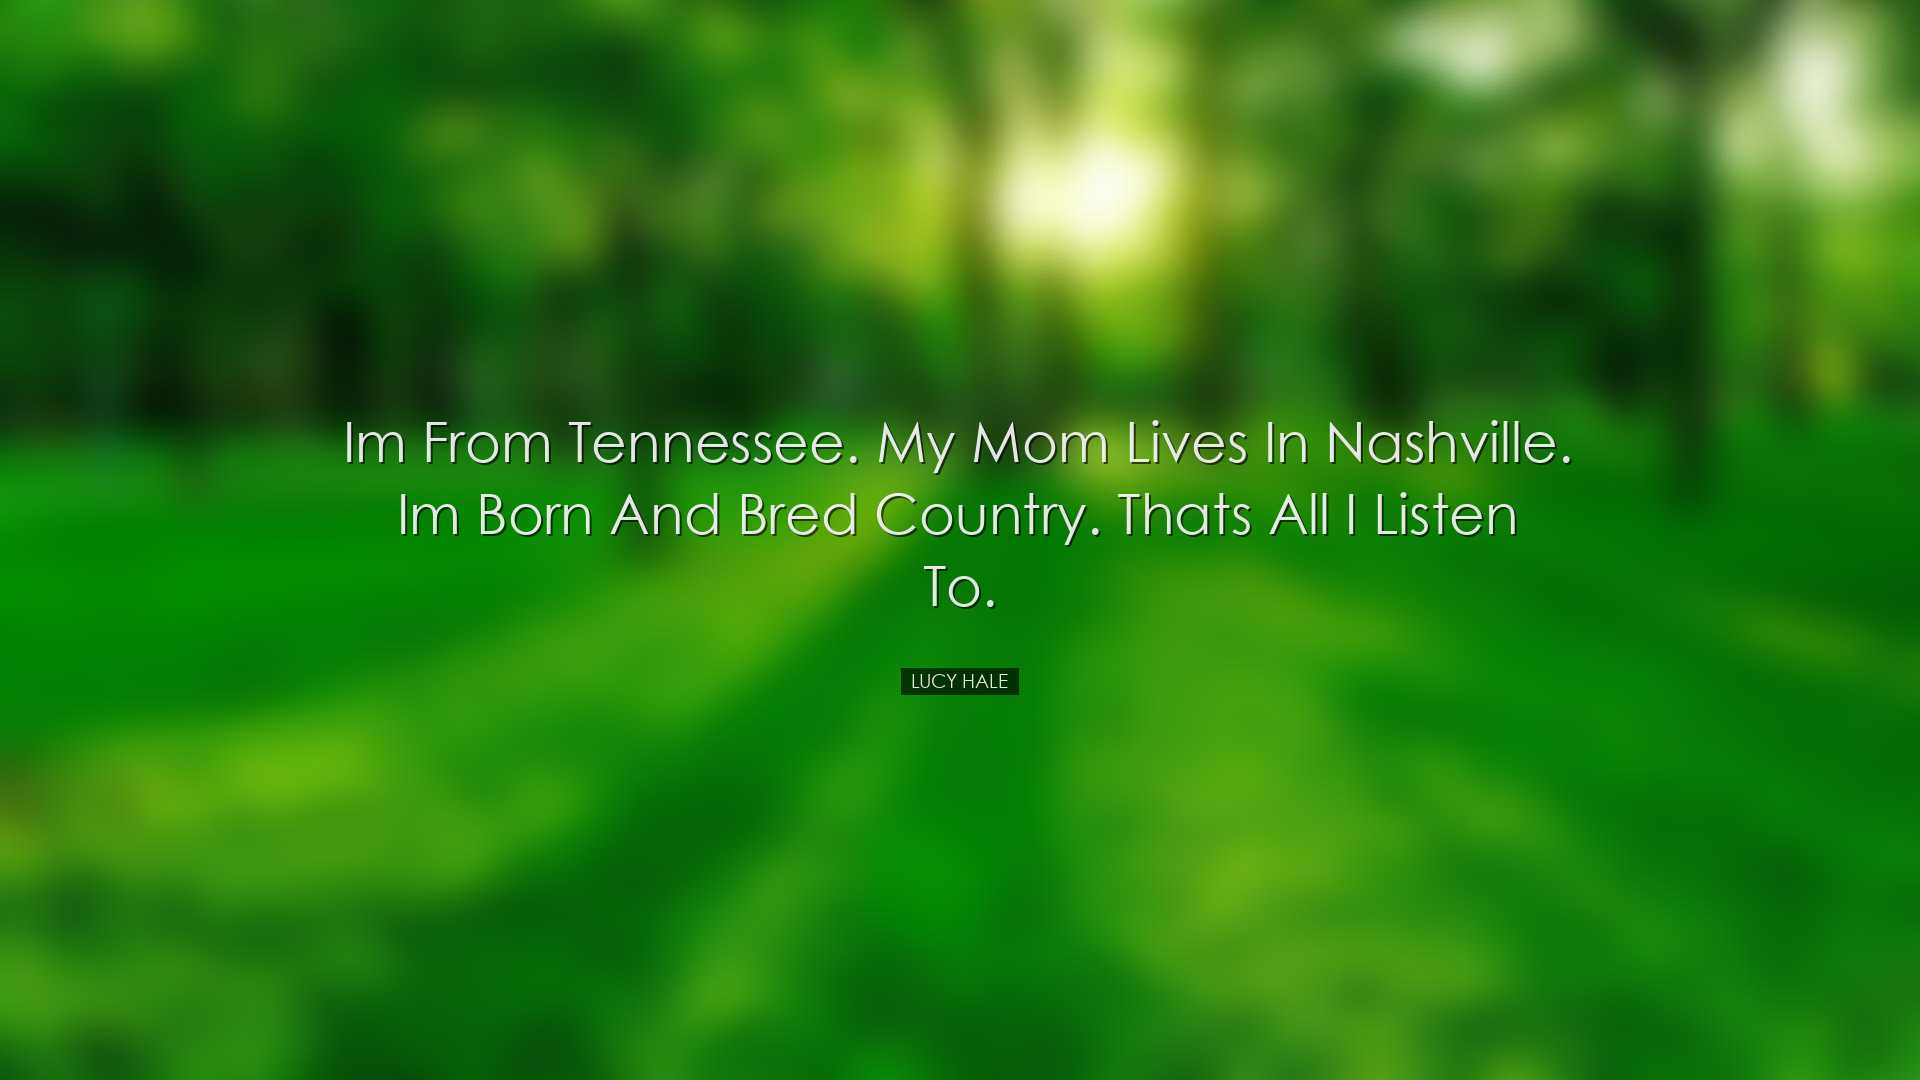 Im from Tennessee. My mom lives in Nashville. Im born and bred cou